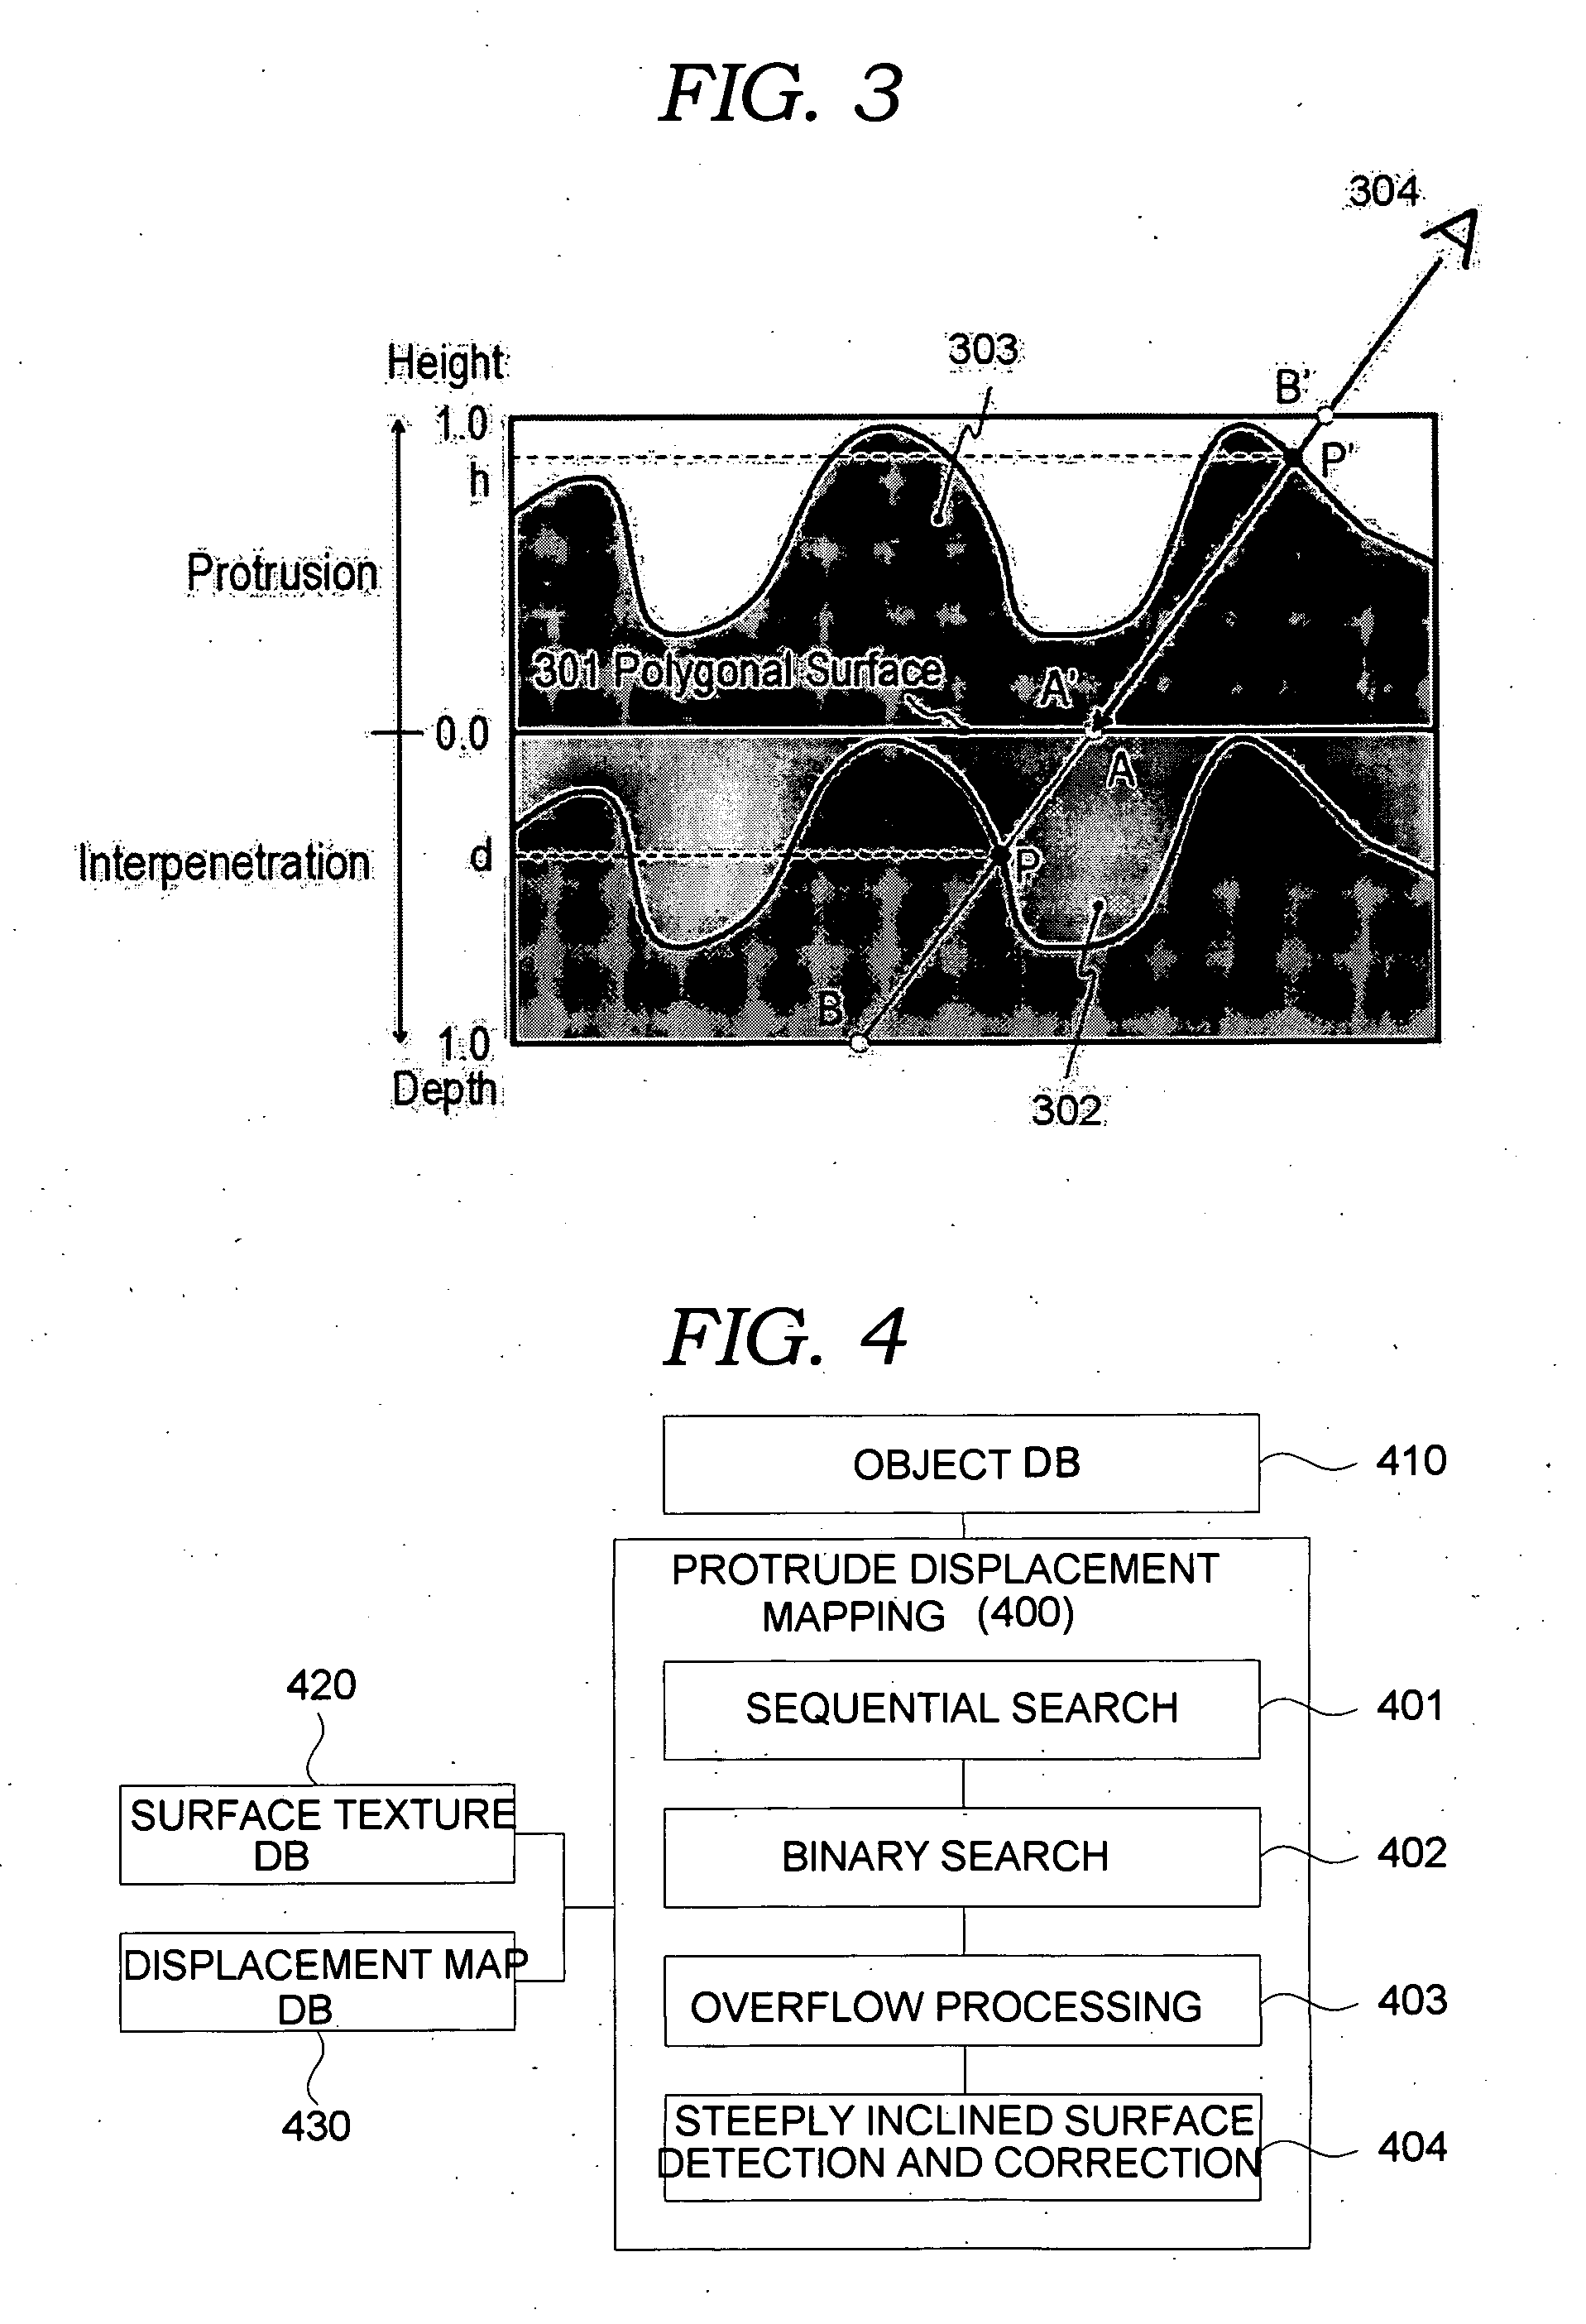 Image-based protruded displacement mapping method and bi-layered displacement mapping method using the same